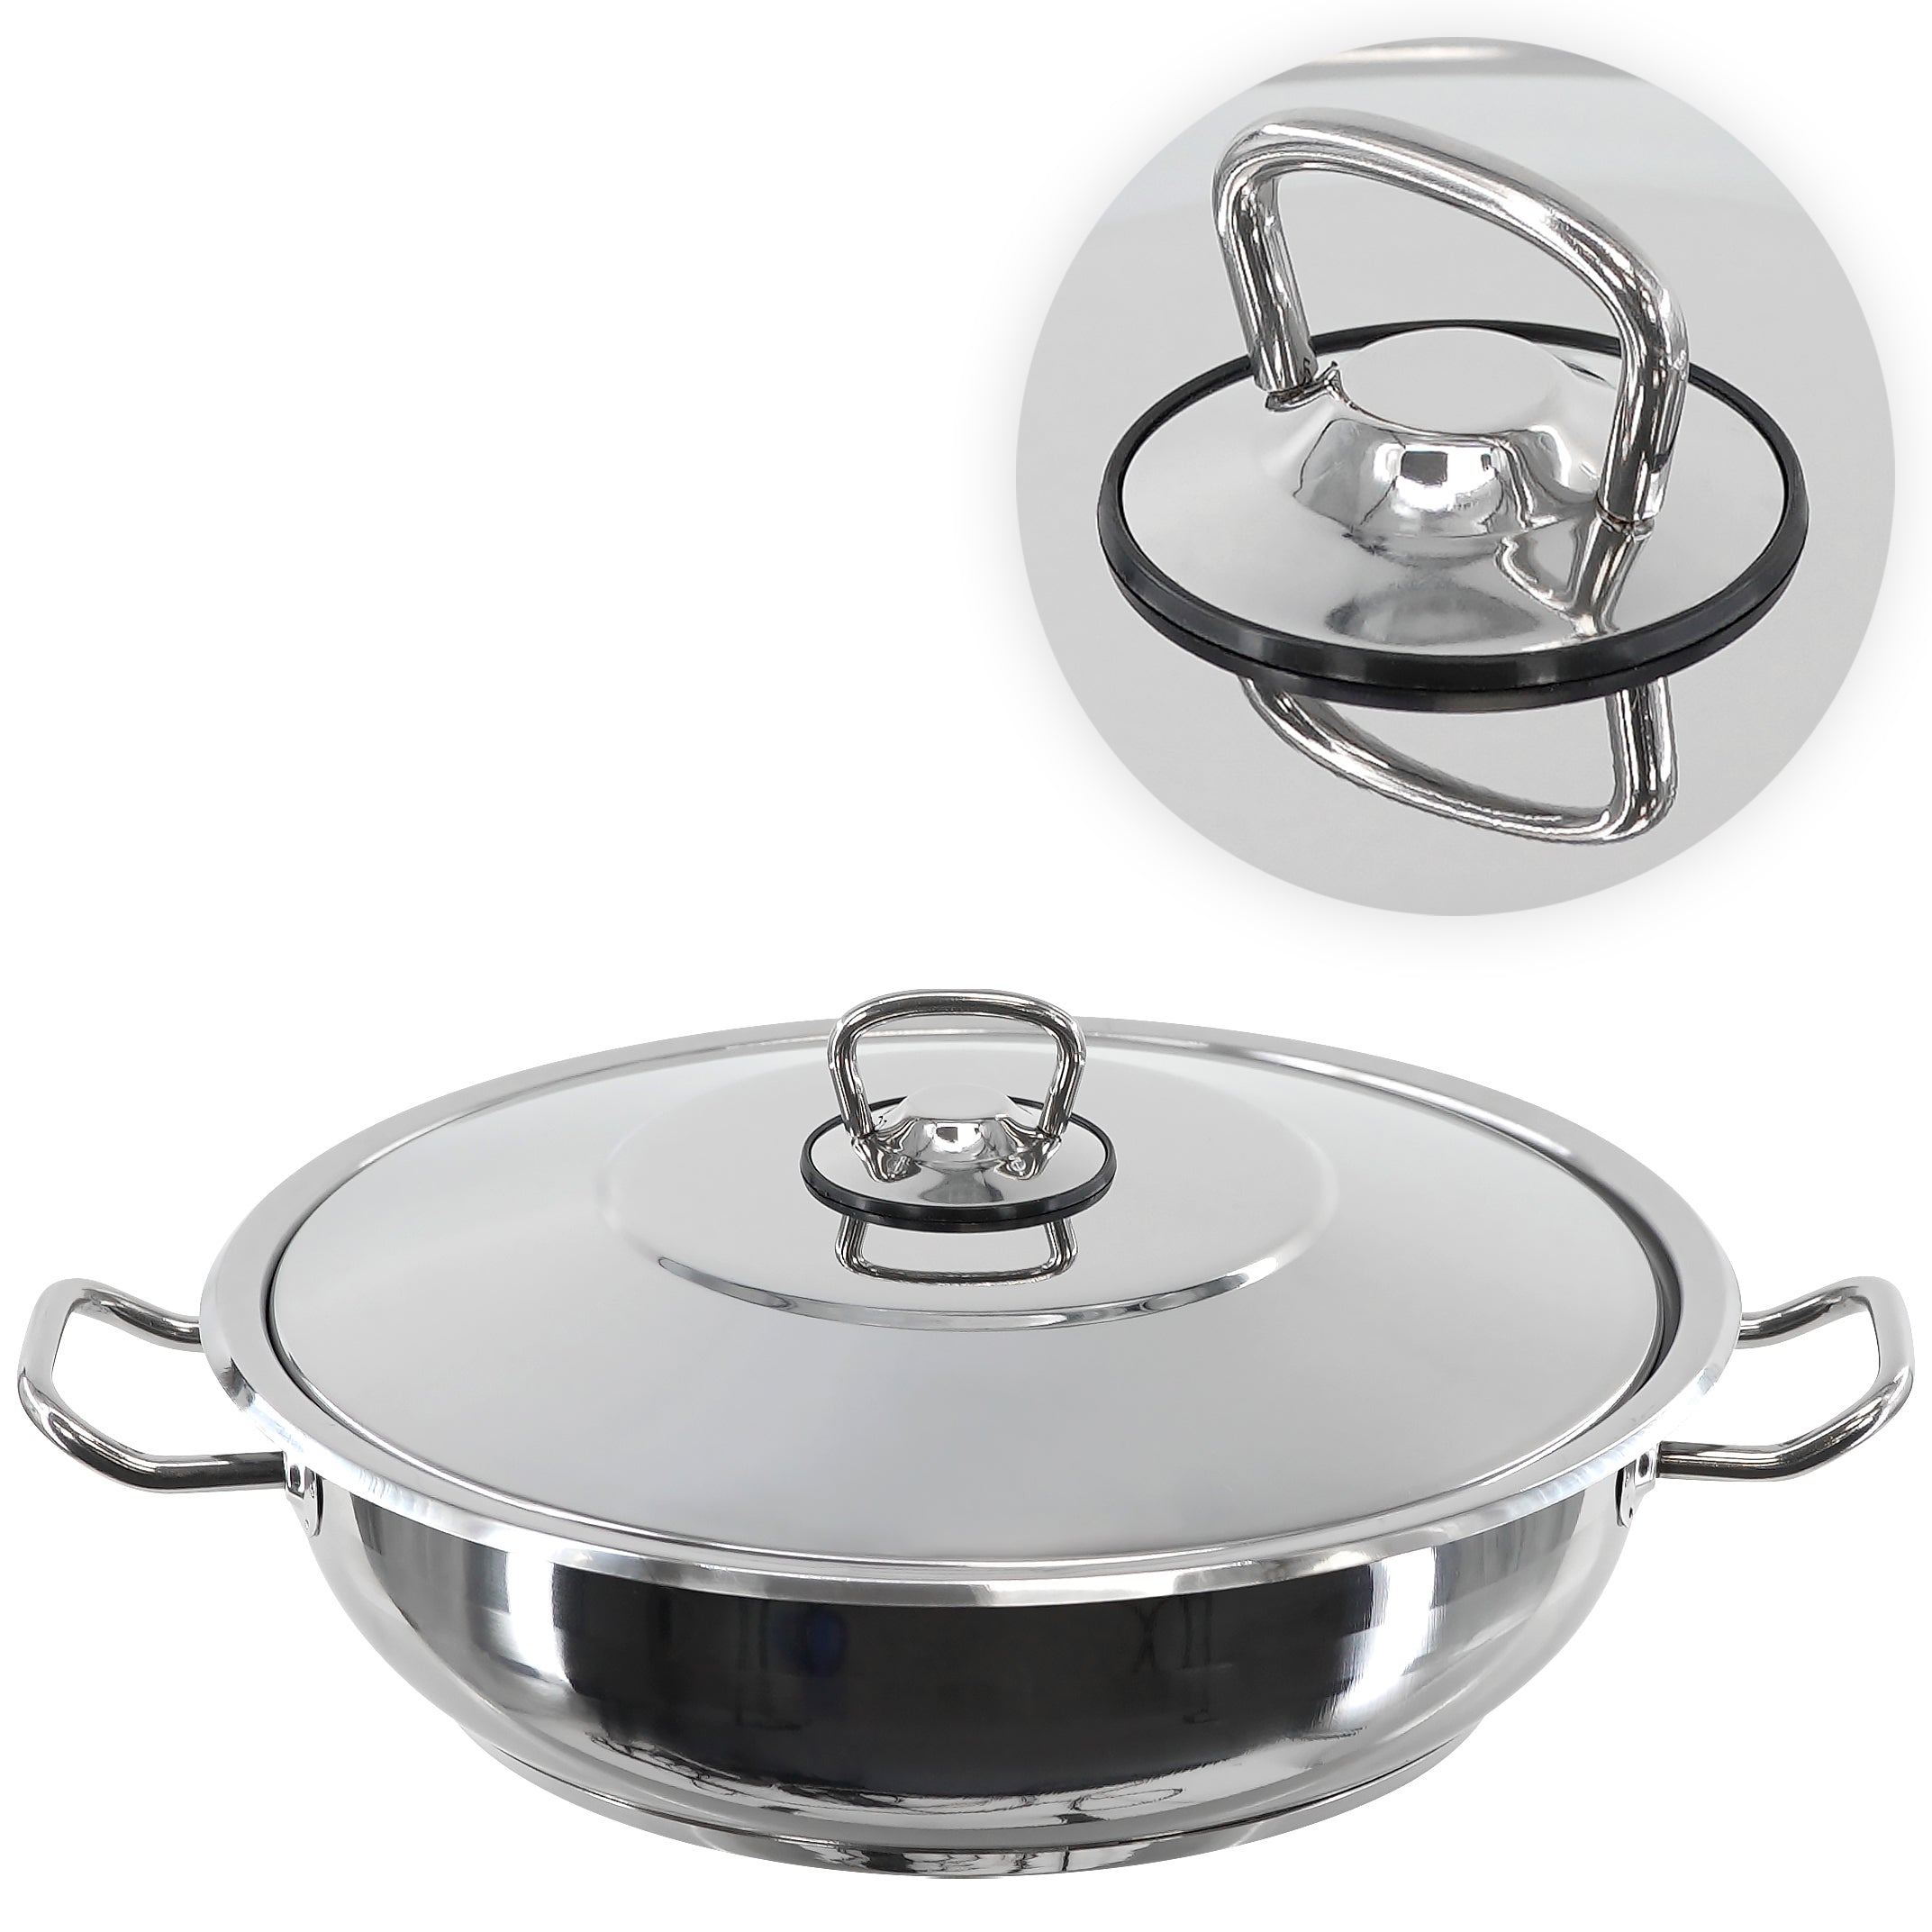 https://themagictoyshop.co.uk/cdn/shop/products/geezy-kitchen-gastro-shallow-pot-with-lid-24-x-6-cm-39210595811550.jpg?v=1701981256&width=2145